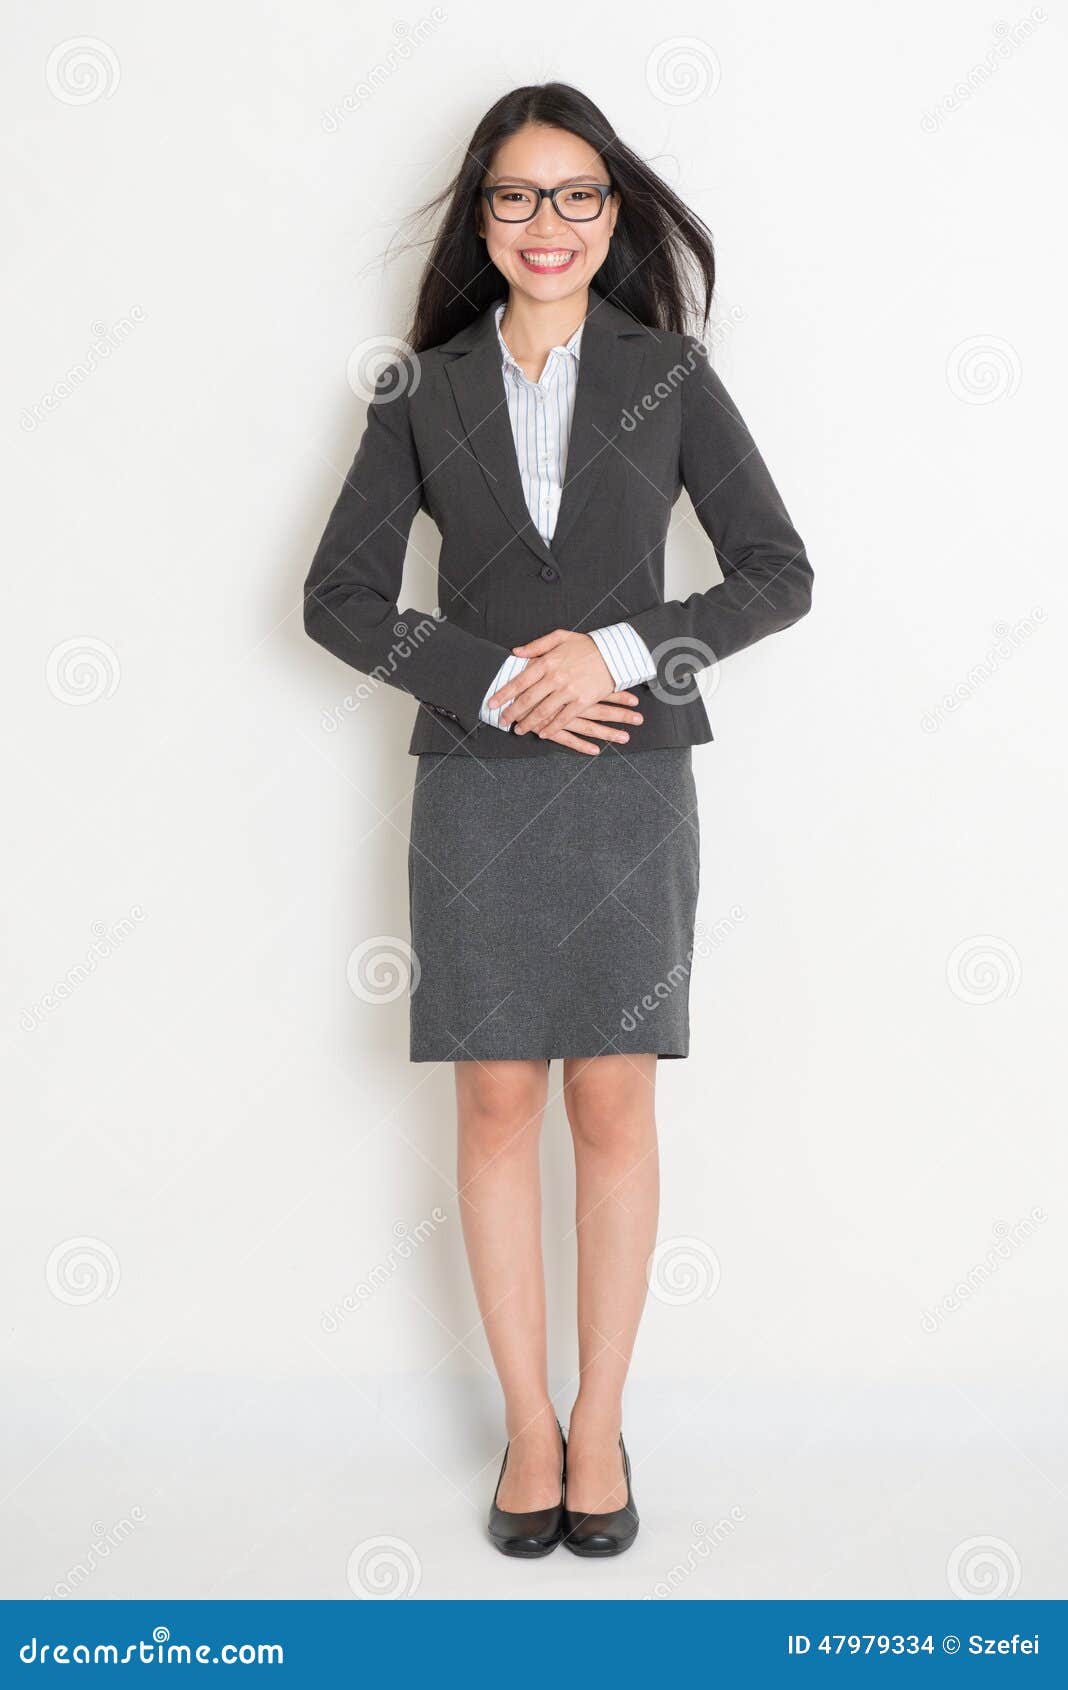 Full Body Asian Business Woman Stock Photo - Image of lady, corporate ...